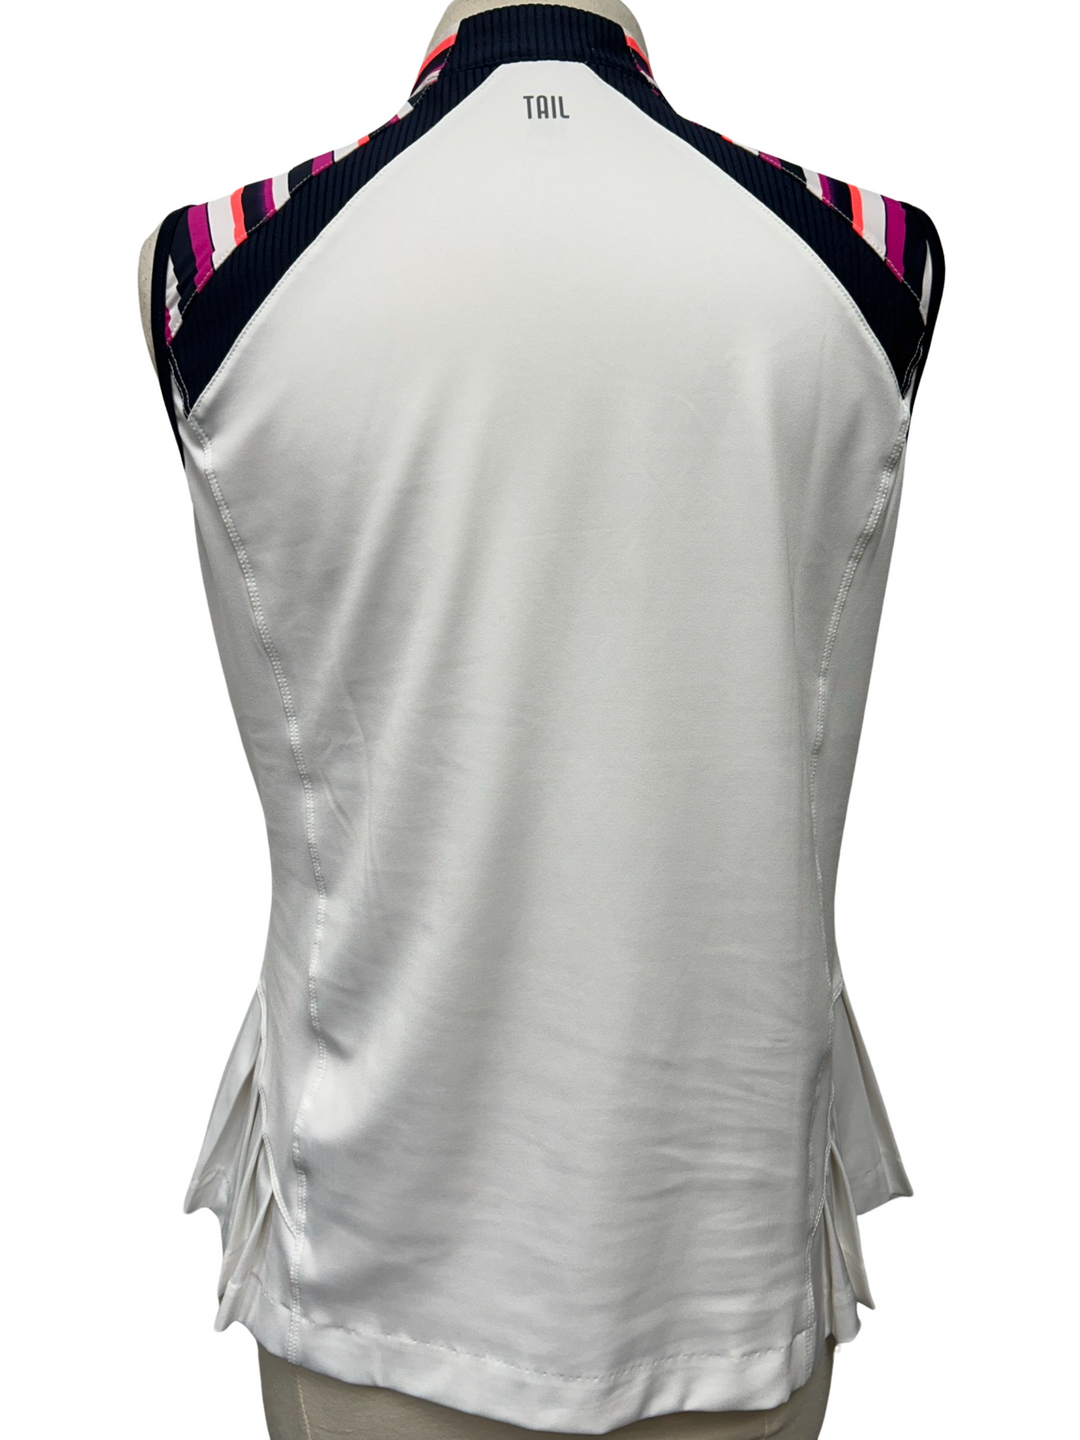 TAIL - Sleeveless White - Color Block Shoulders - Size L - Skorzie